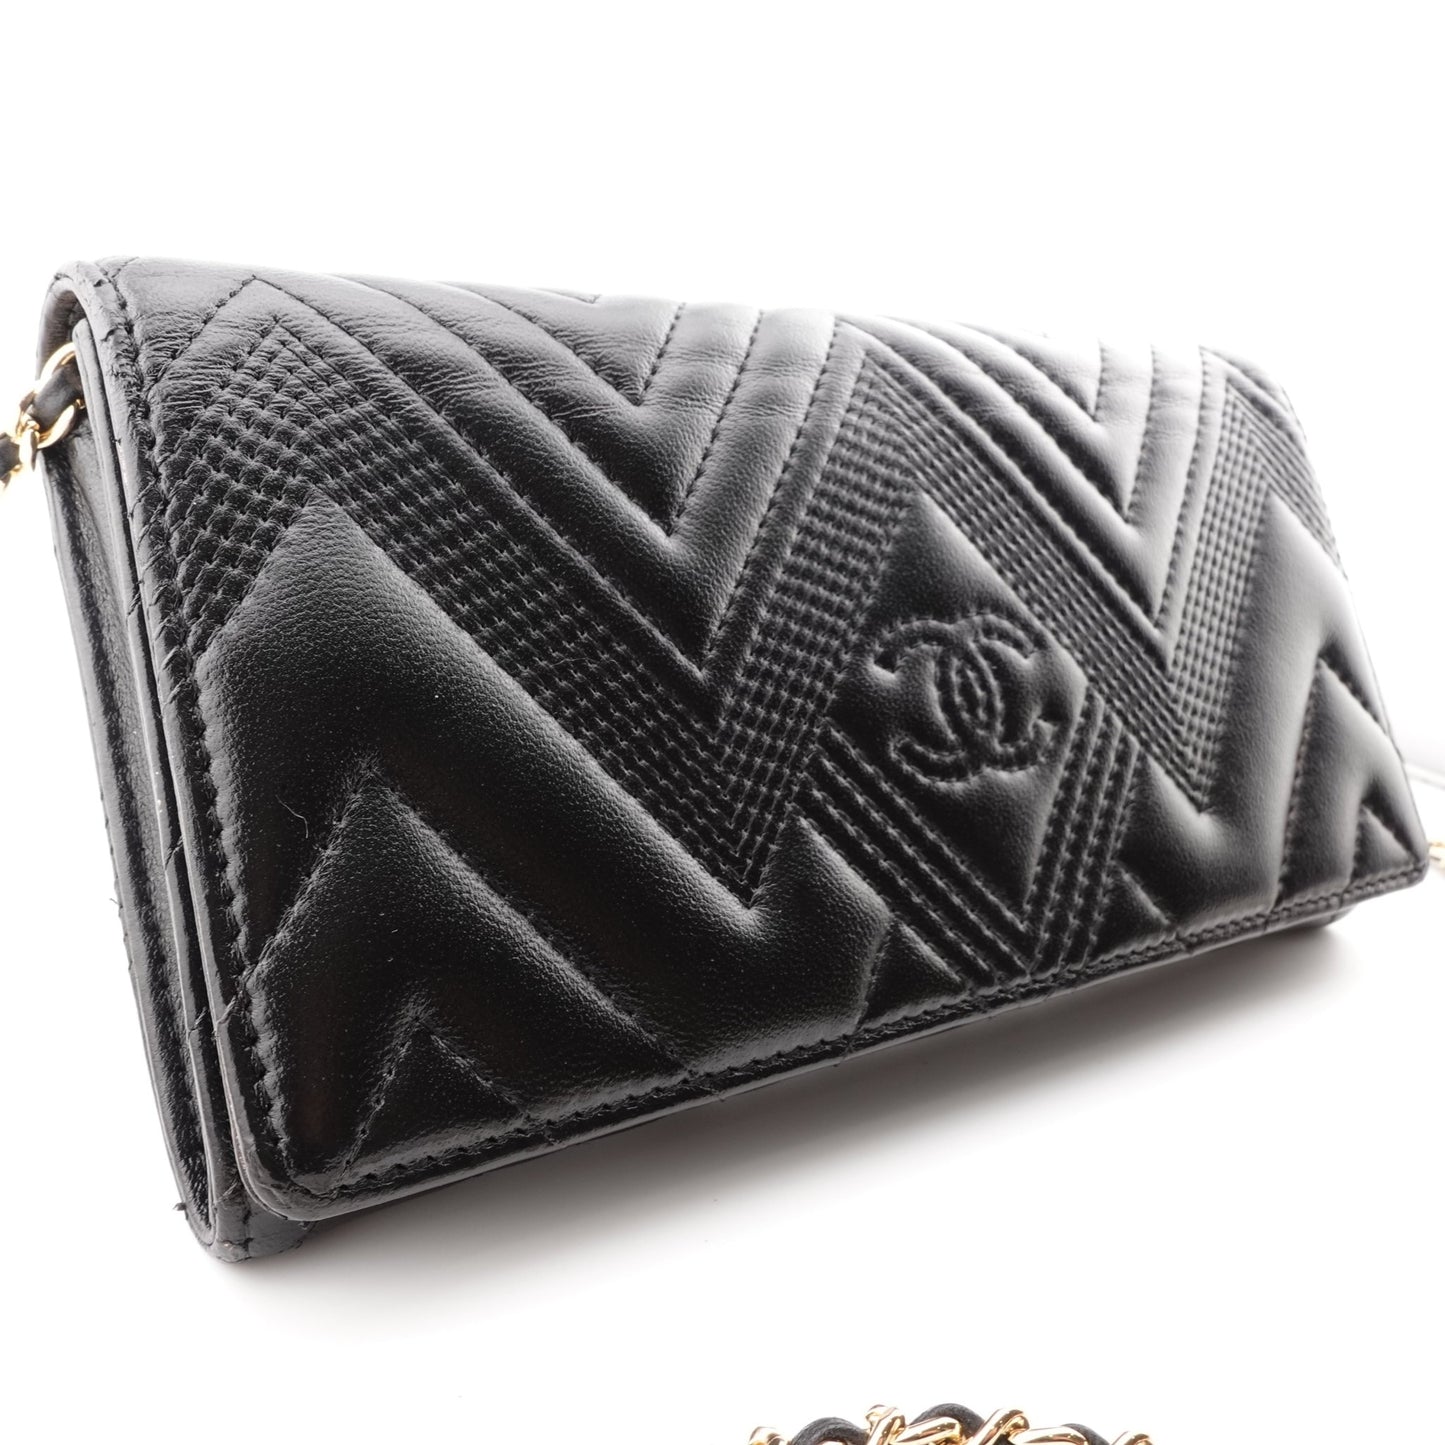 CHANEL Lambskin Chevron Quilted Full Flap Wallet on Chain - Bag Envy